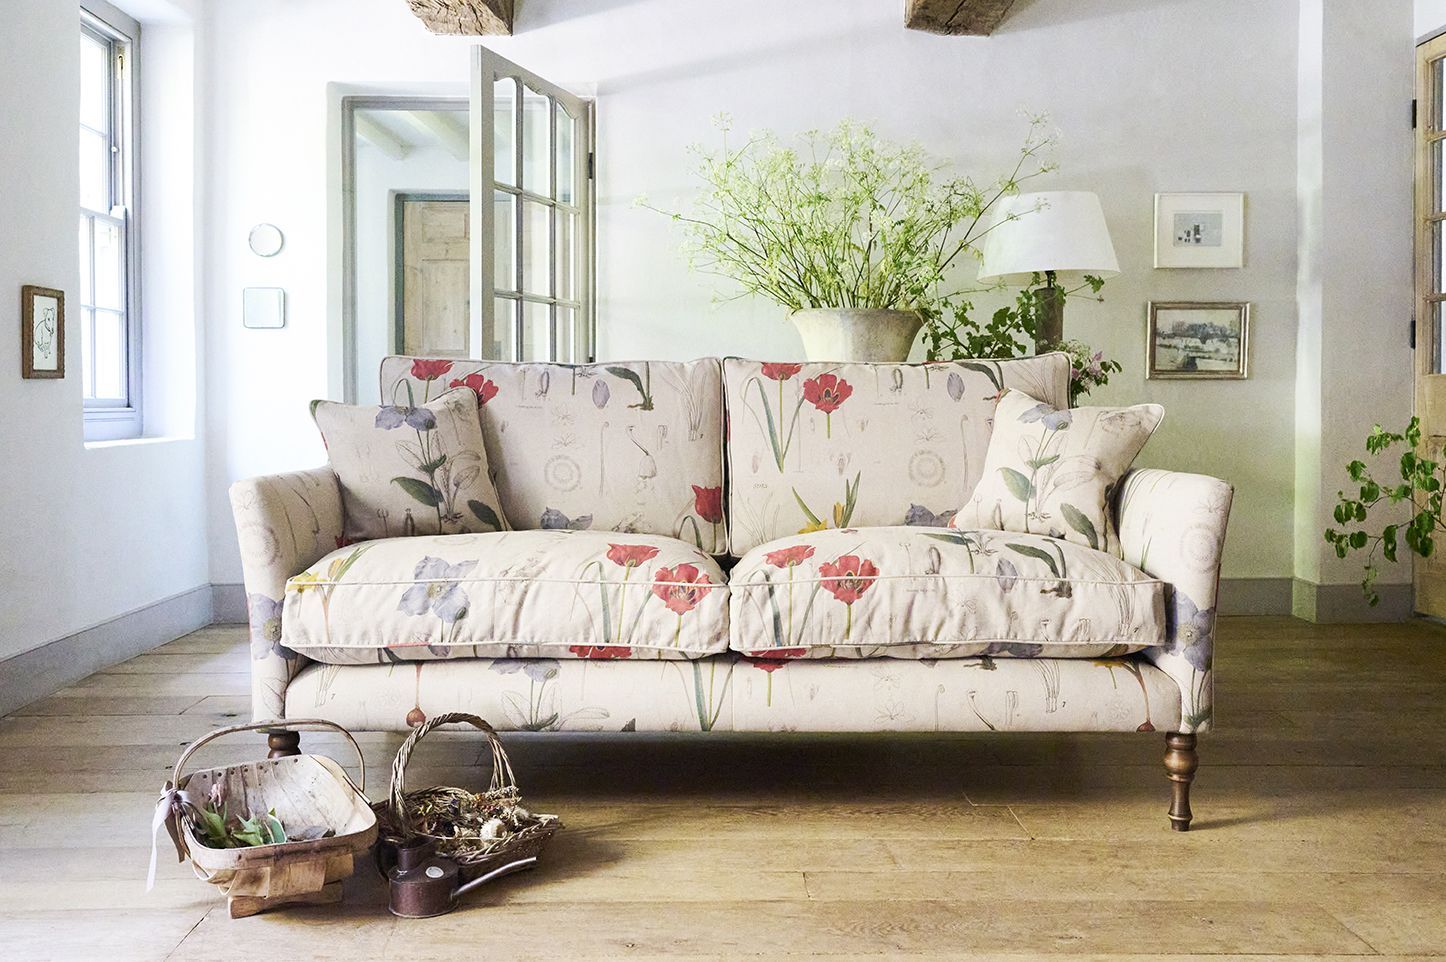 Why You Should Consider Choosing A Bold Patterned Fabric Sofa Pertaining To Sofas In Pattern (View 6 of 15)